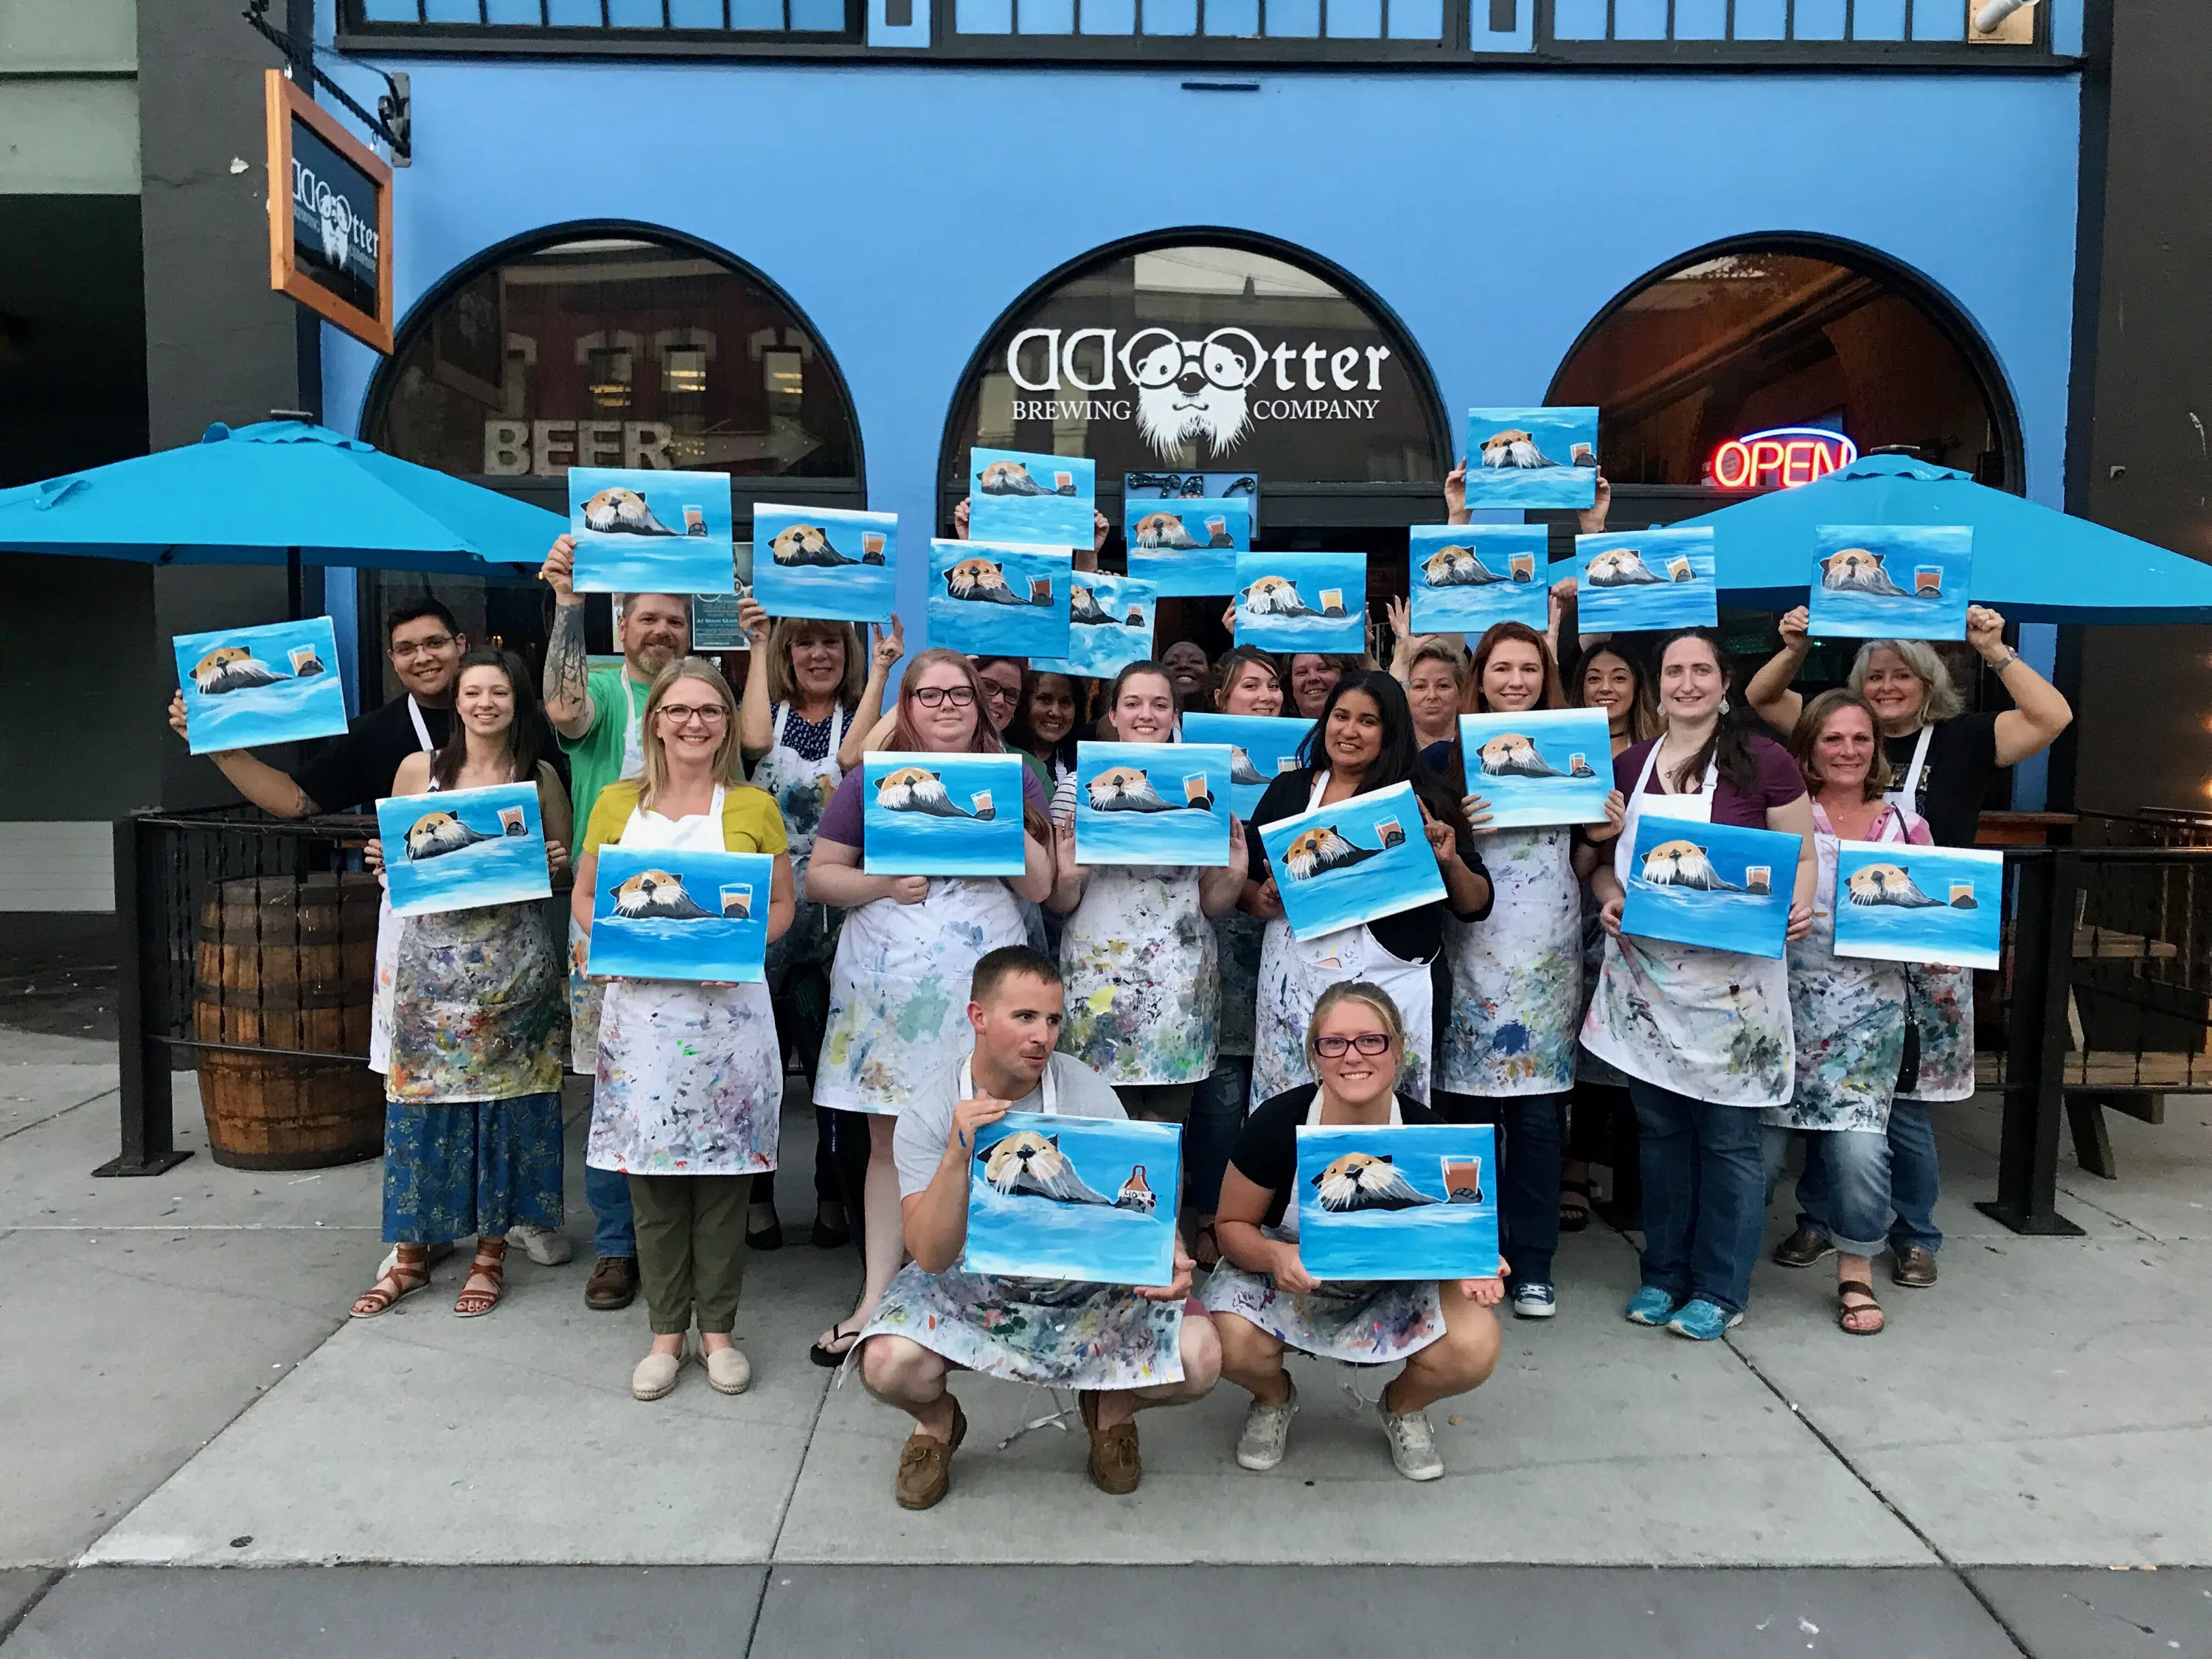 Paint and Sip at Odd Otter Brewing Company